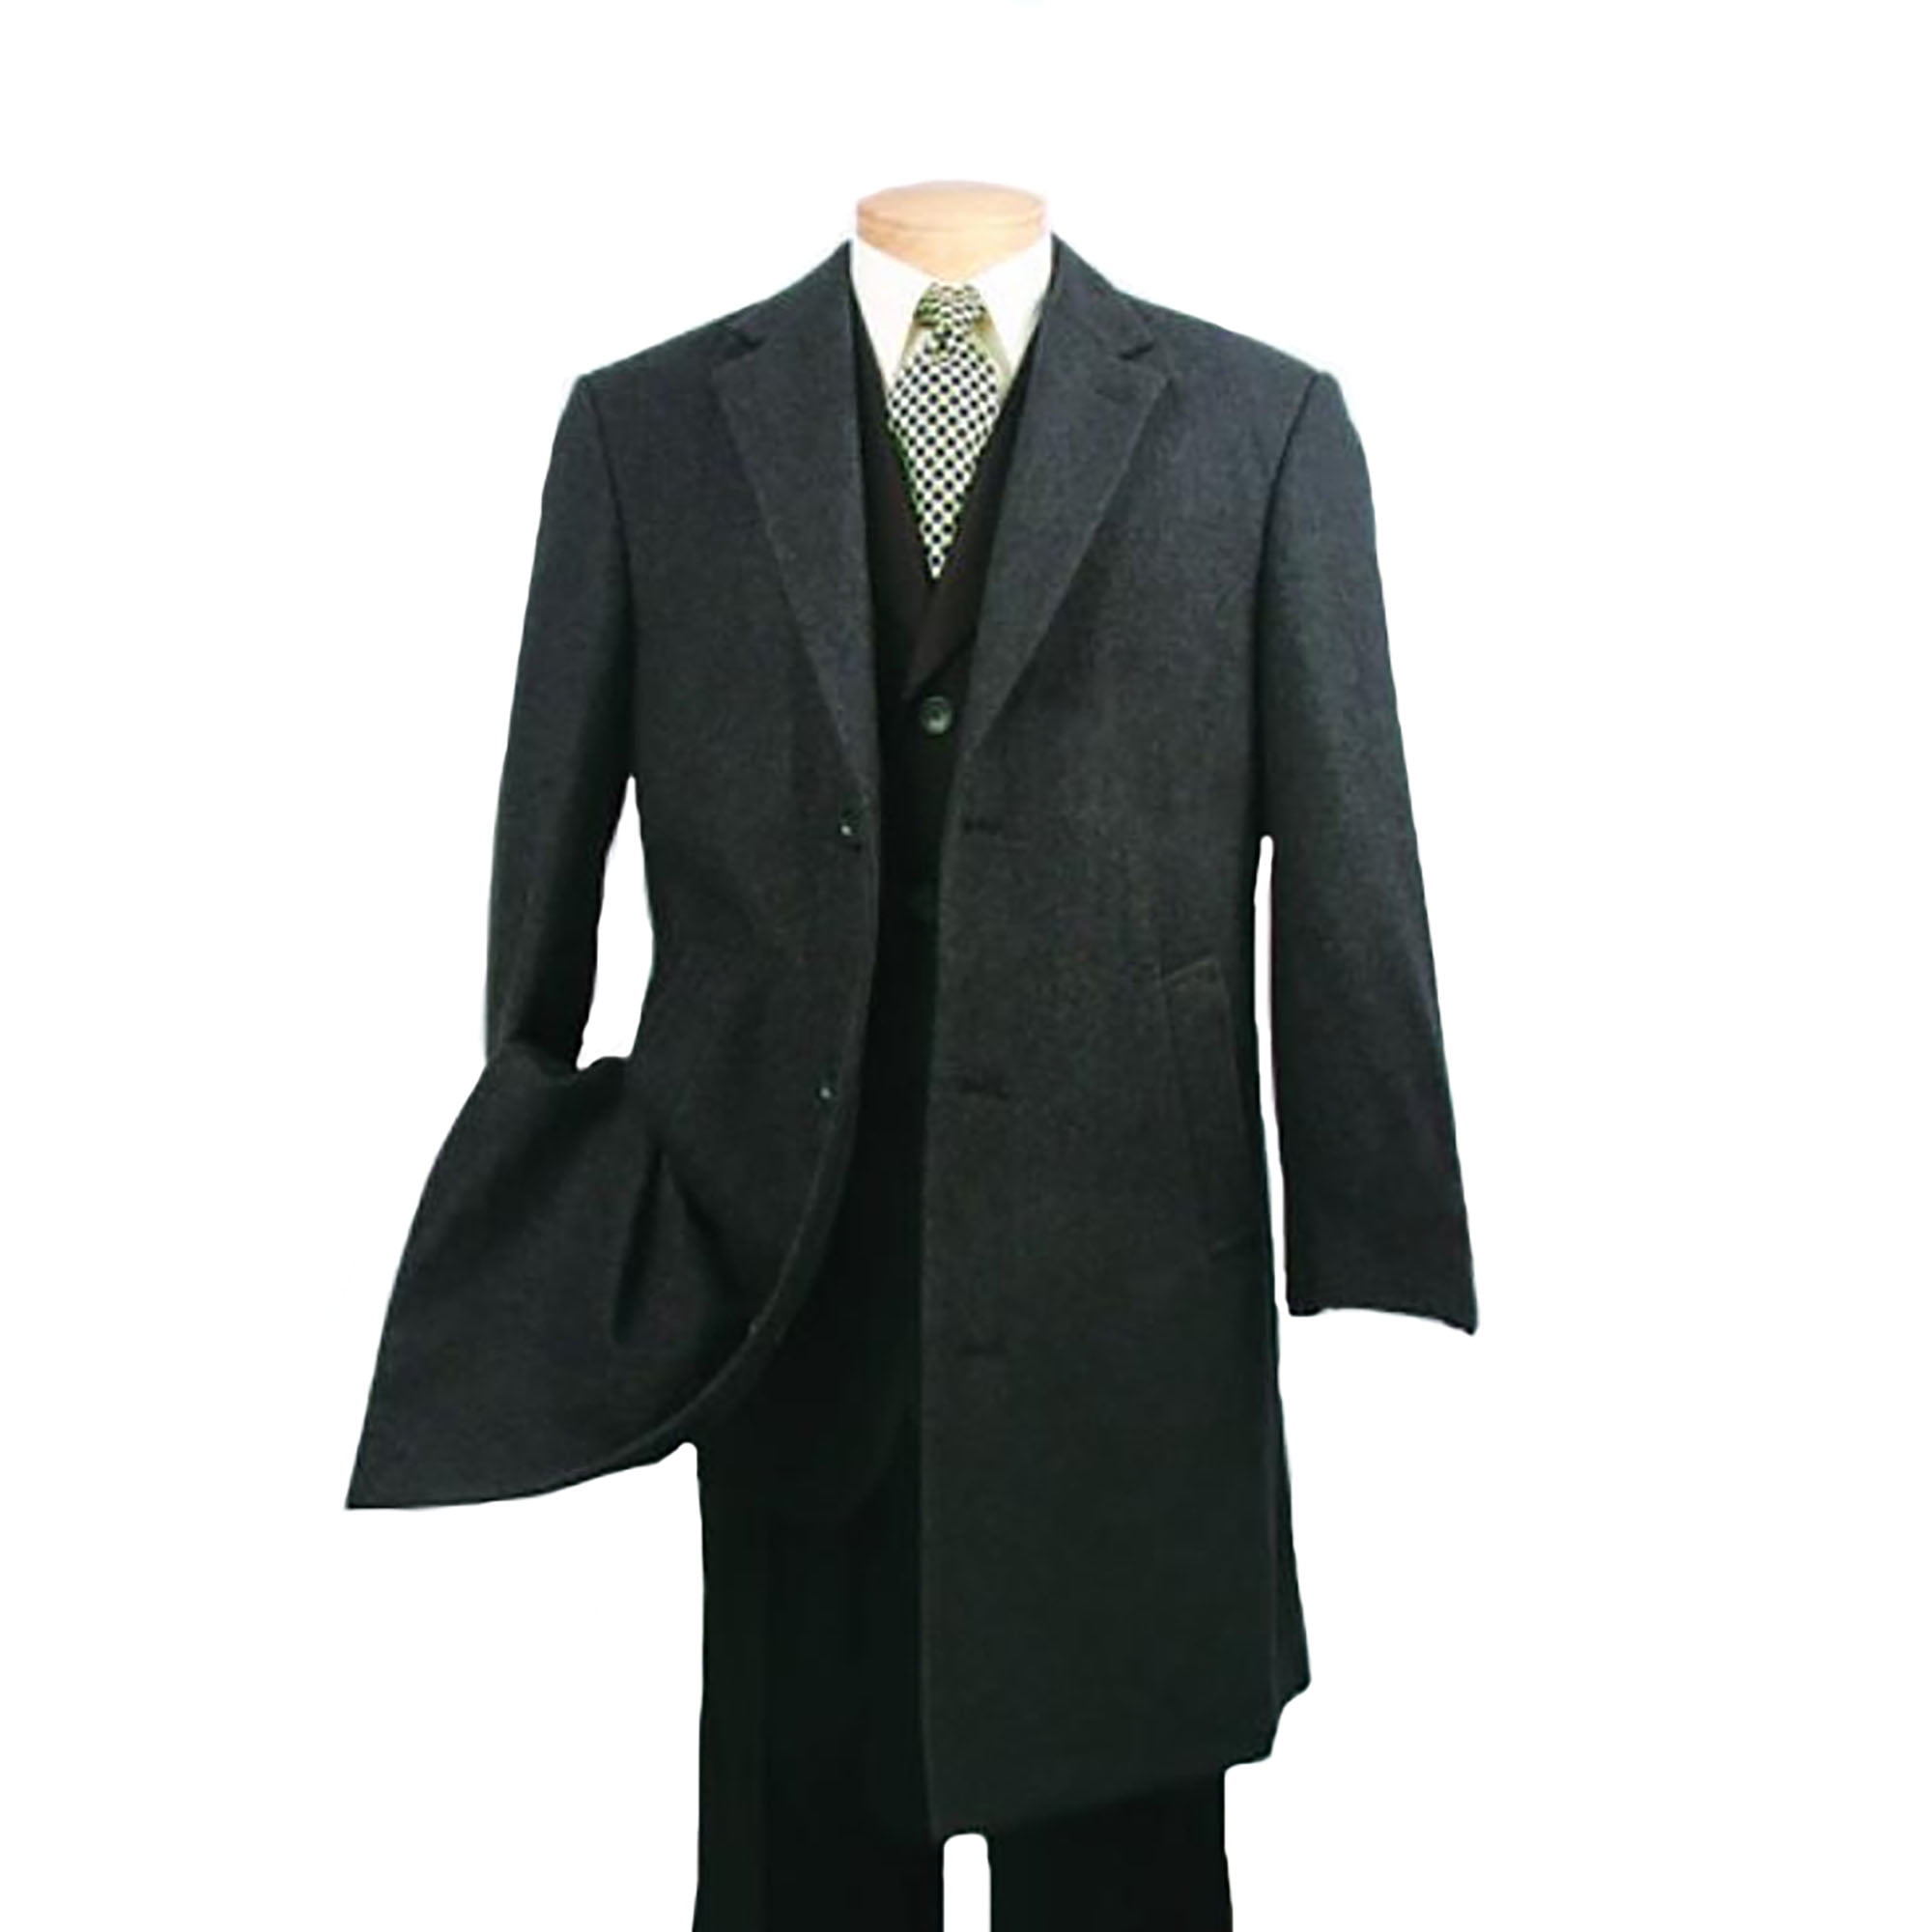 Mens Charcoal Single Breasted Wool Cashmere Overcoat Topcoat Full ...